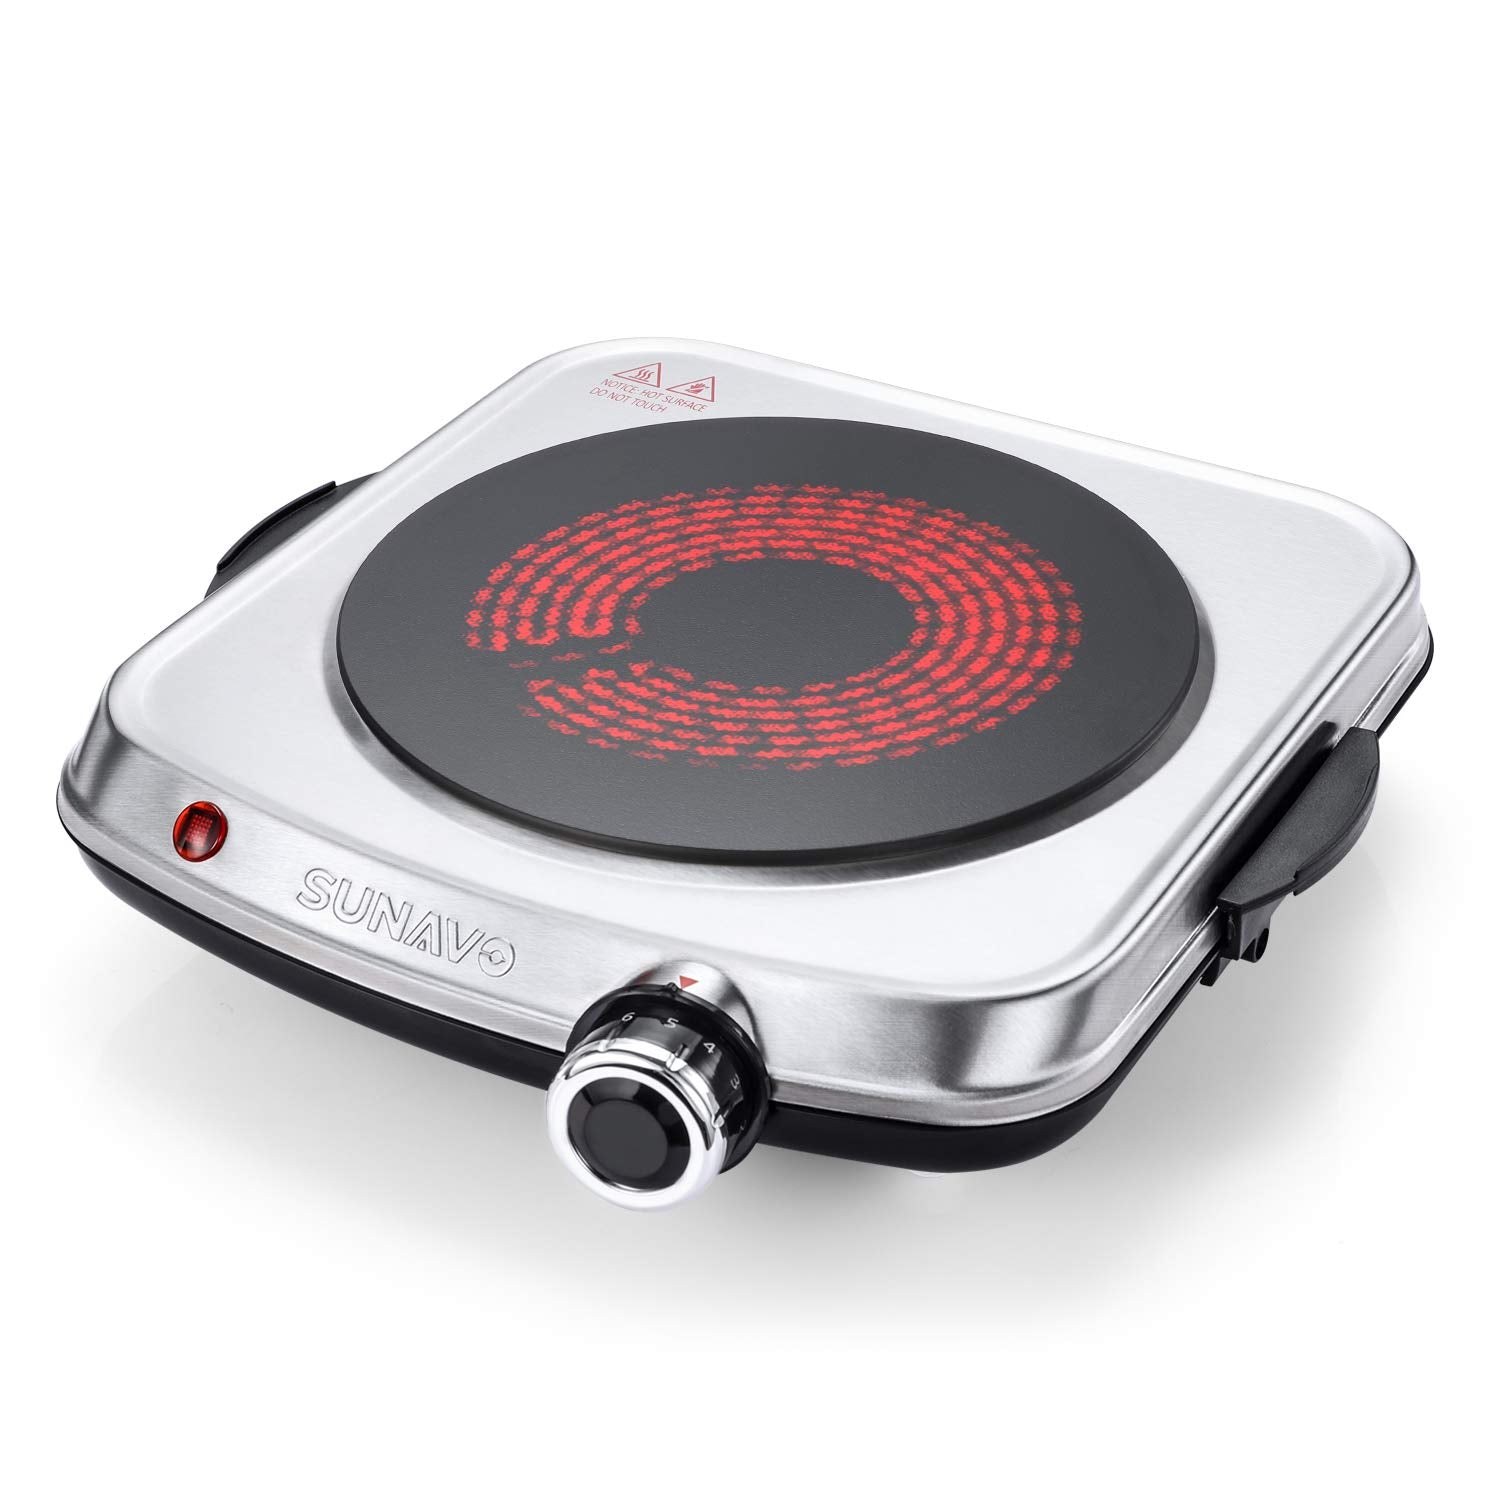 1500W Hot Plates for Cooking, Electric Single Burner with Handles, 6 Power Levels Stainless Steel Hot Plate for Kitchen Camping RV and More Silver